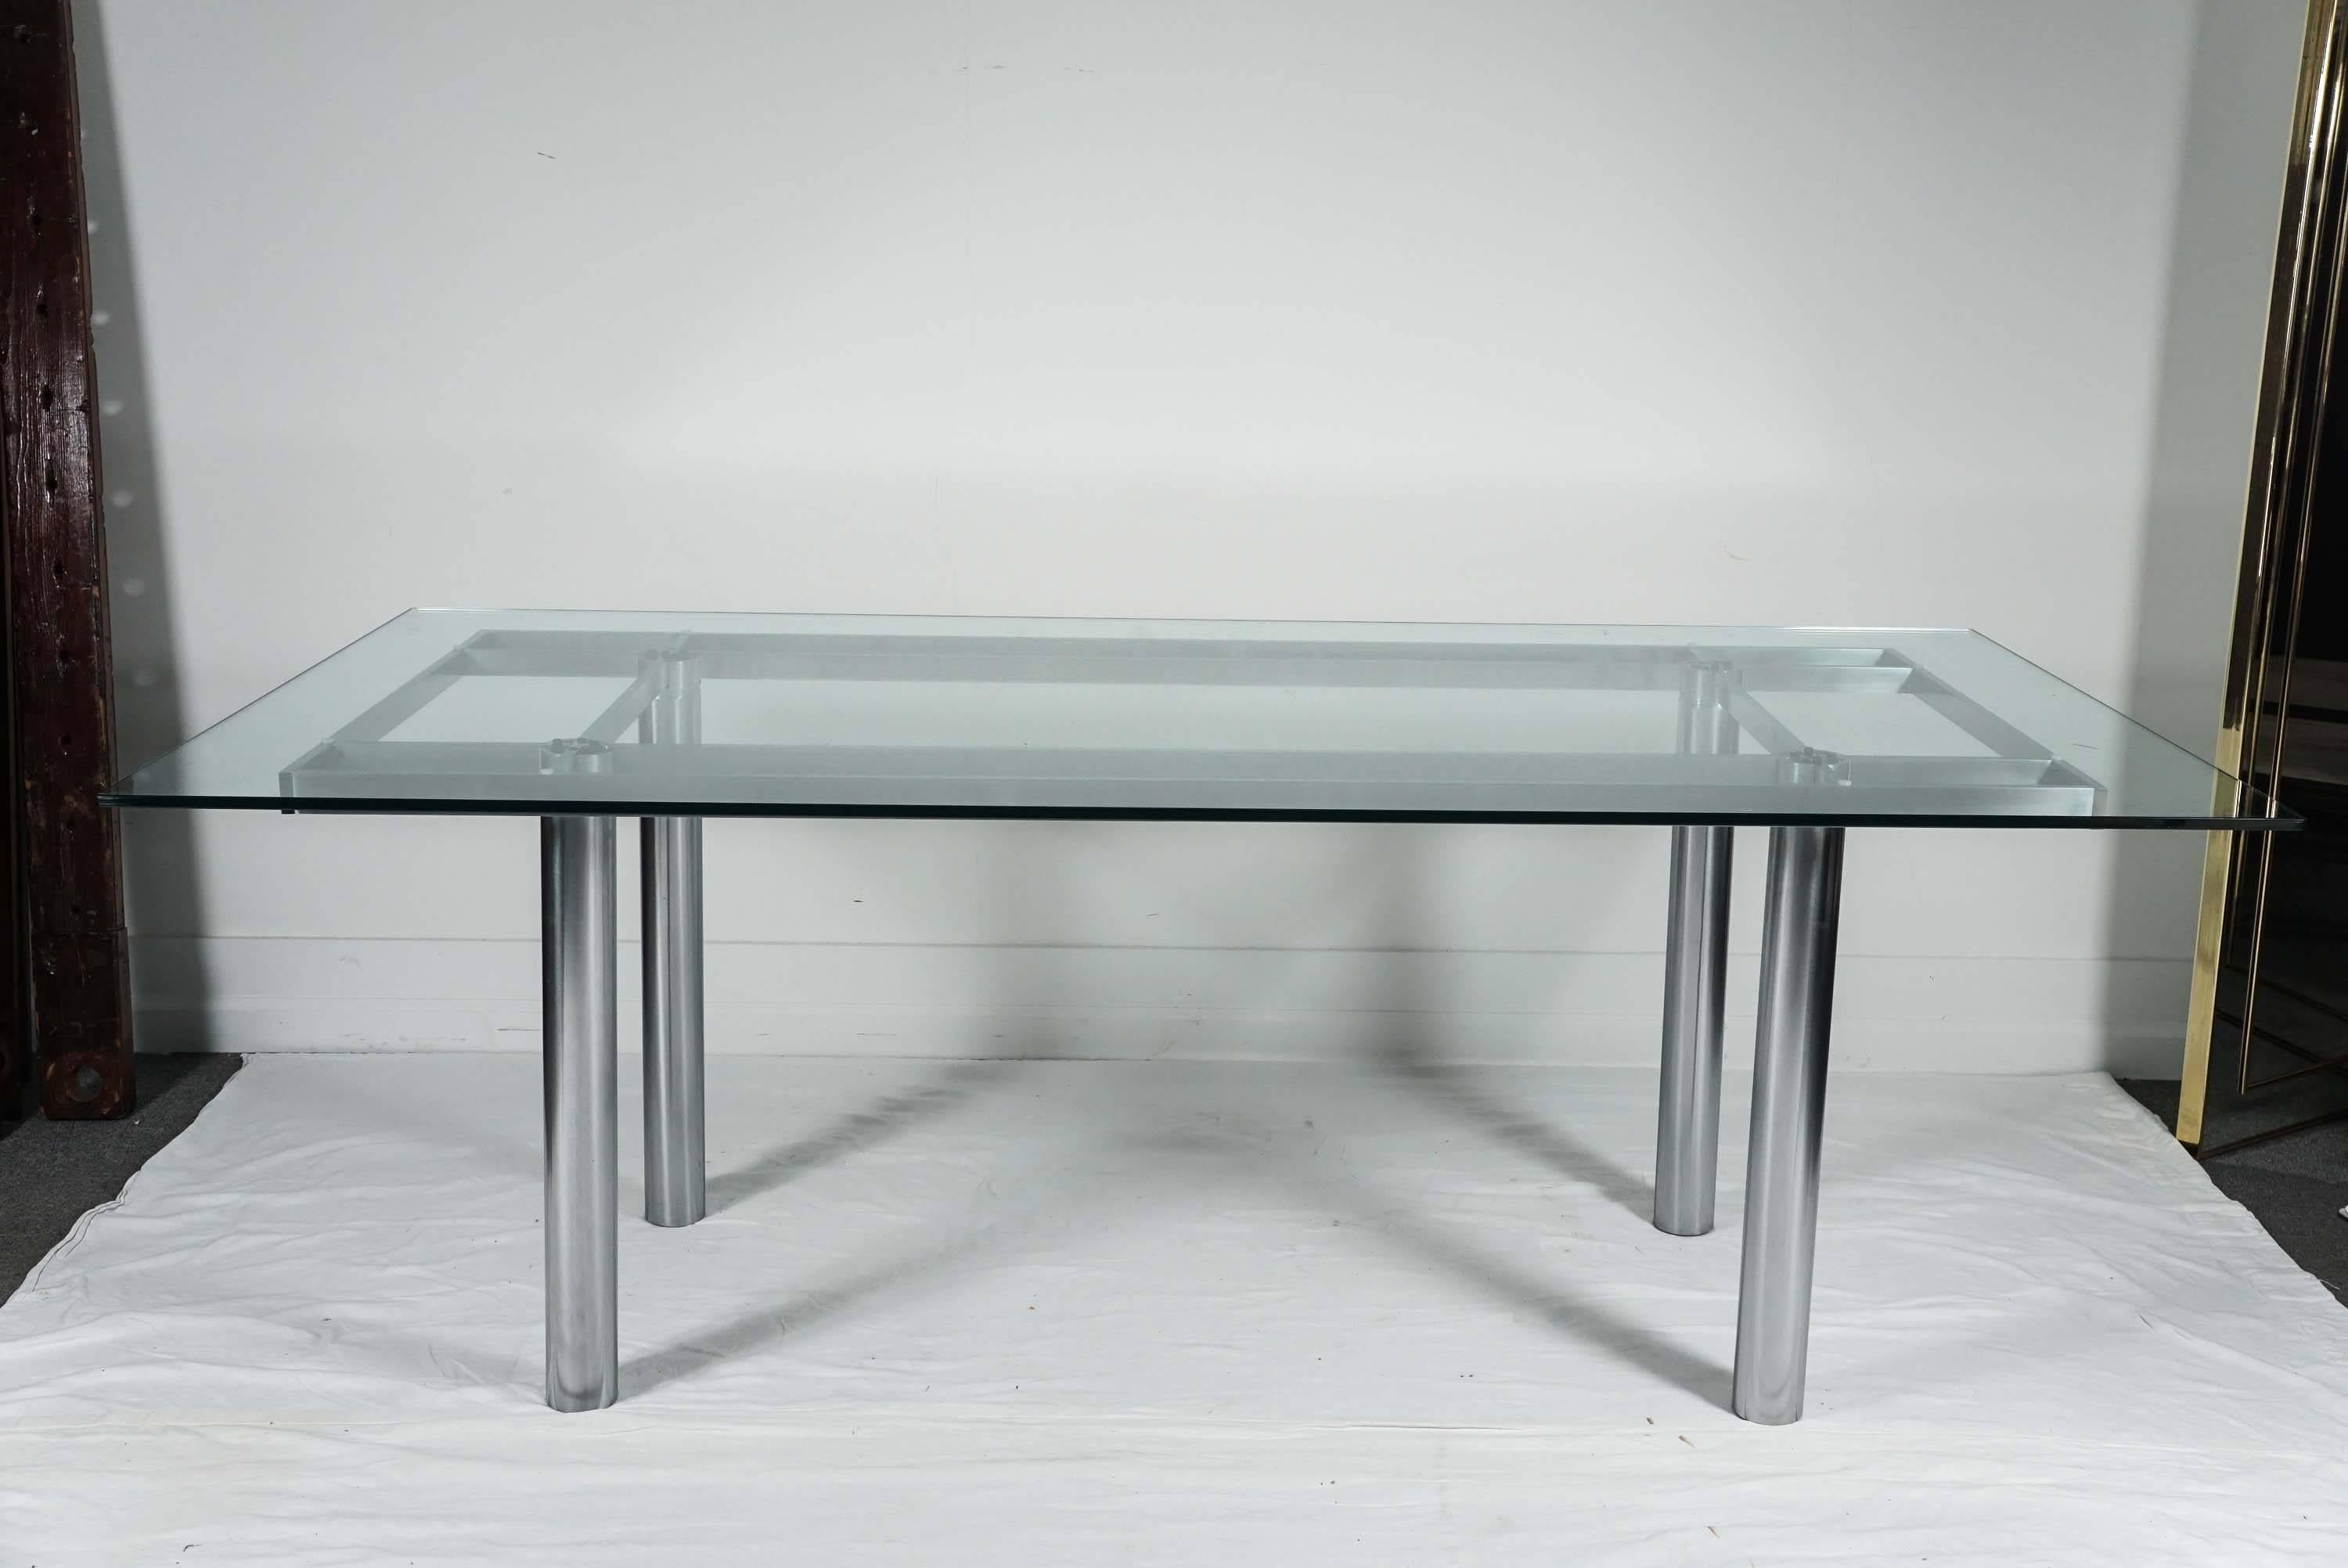 Andre dining table,
Knoll, 1970.
Stainless steel with glass top.
All original in great condition.